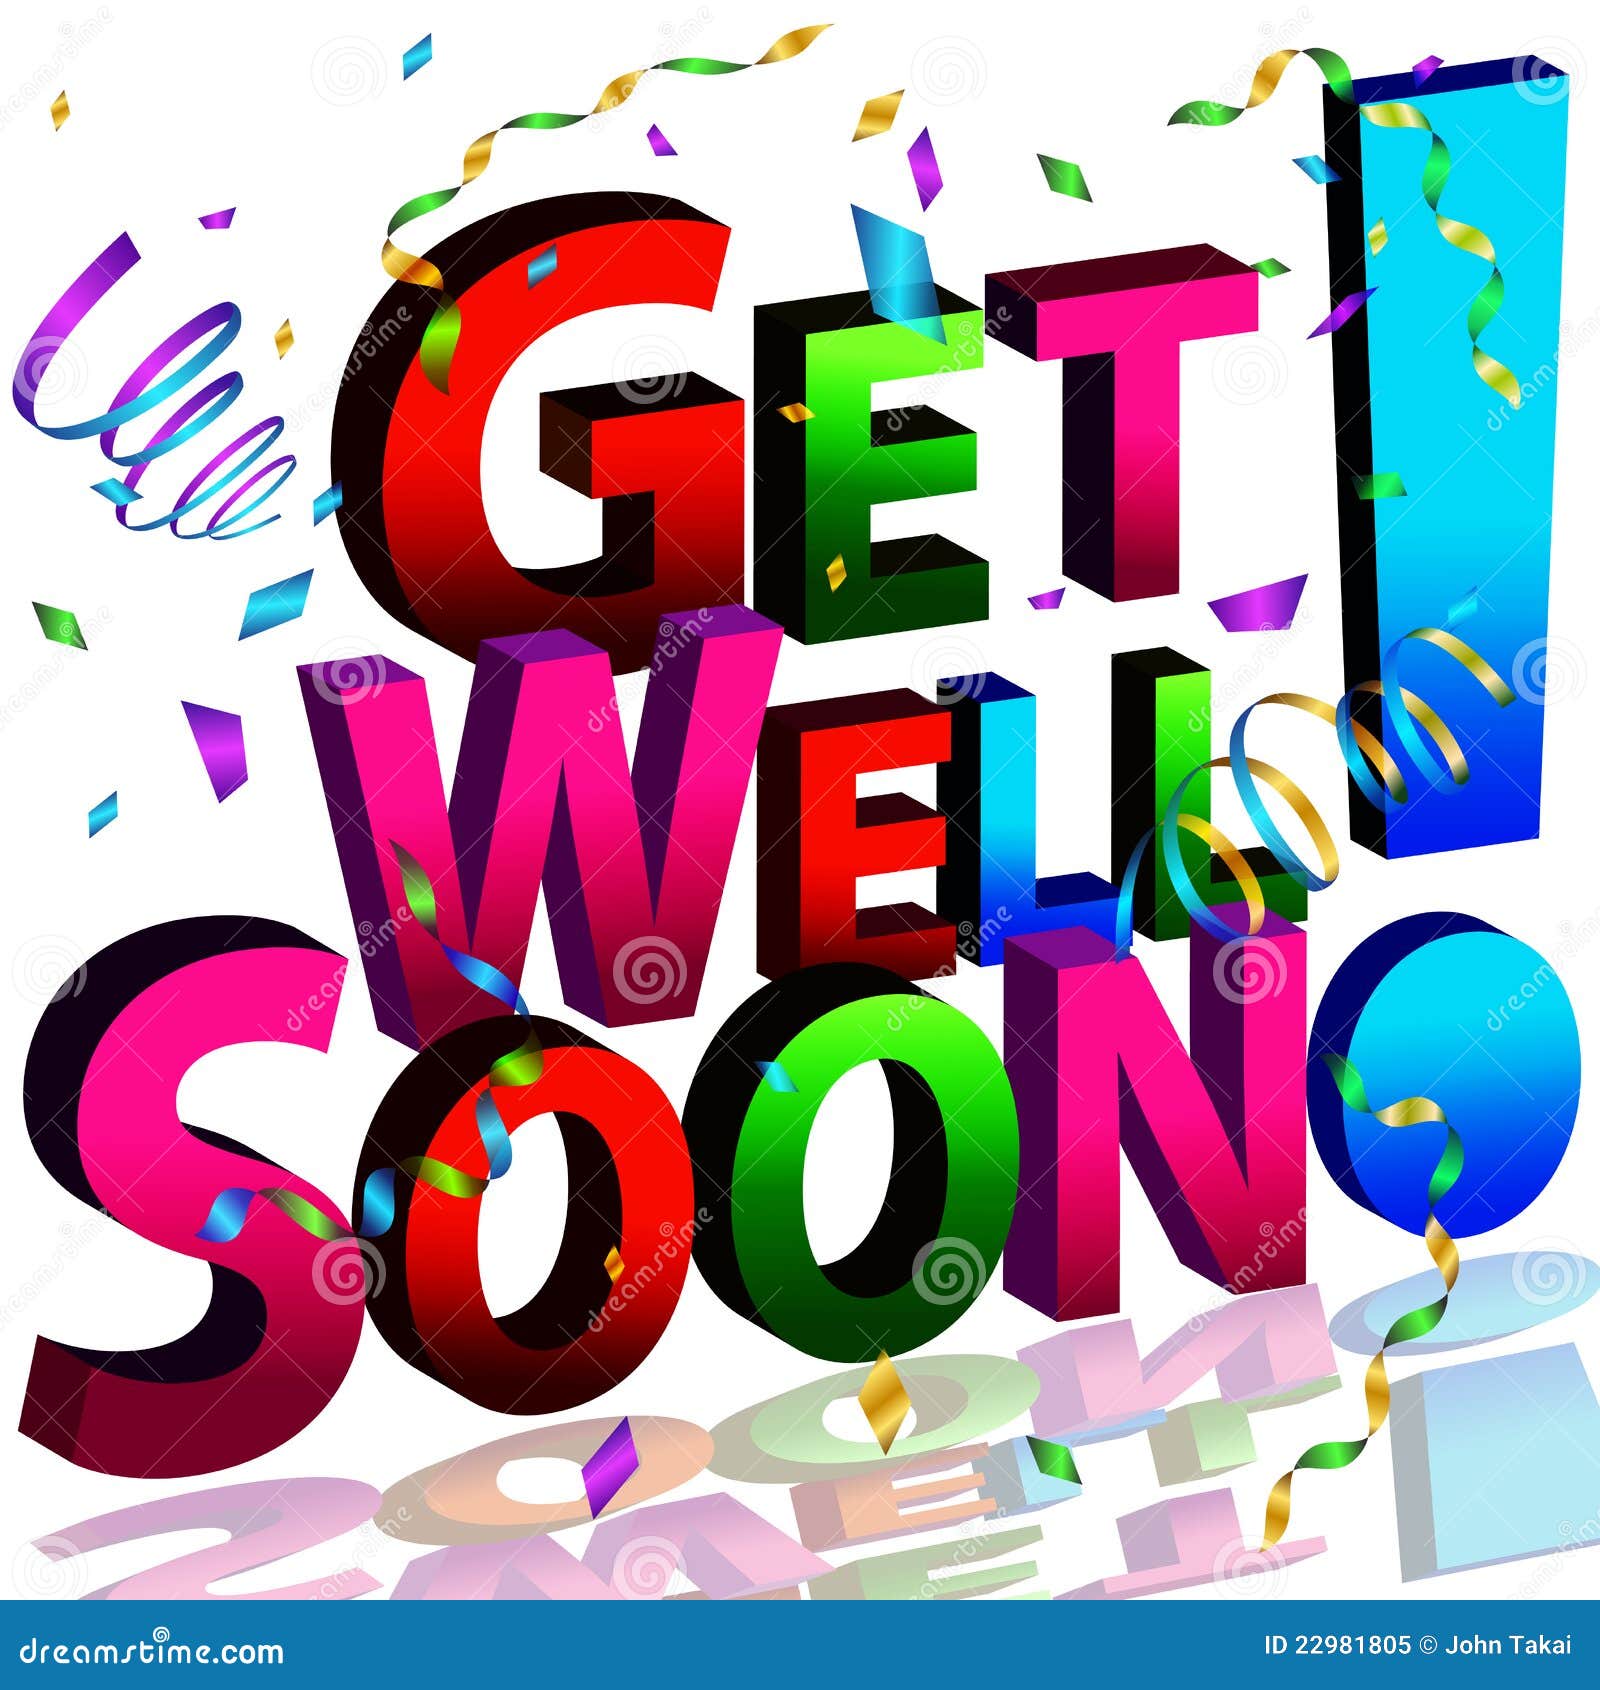 clip art get well pictures - photo #26